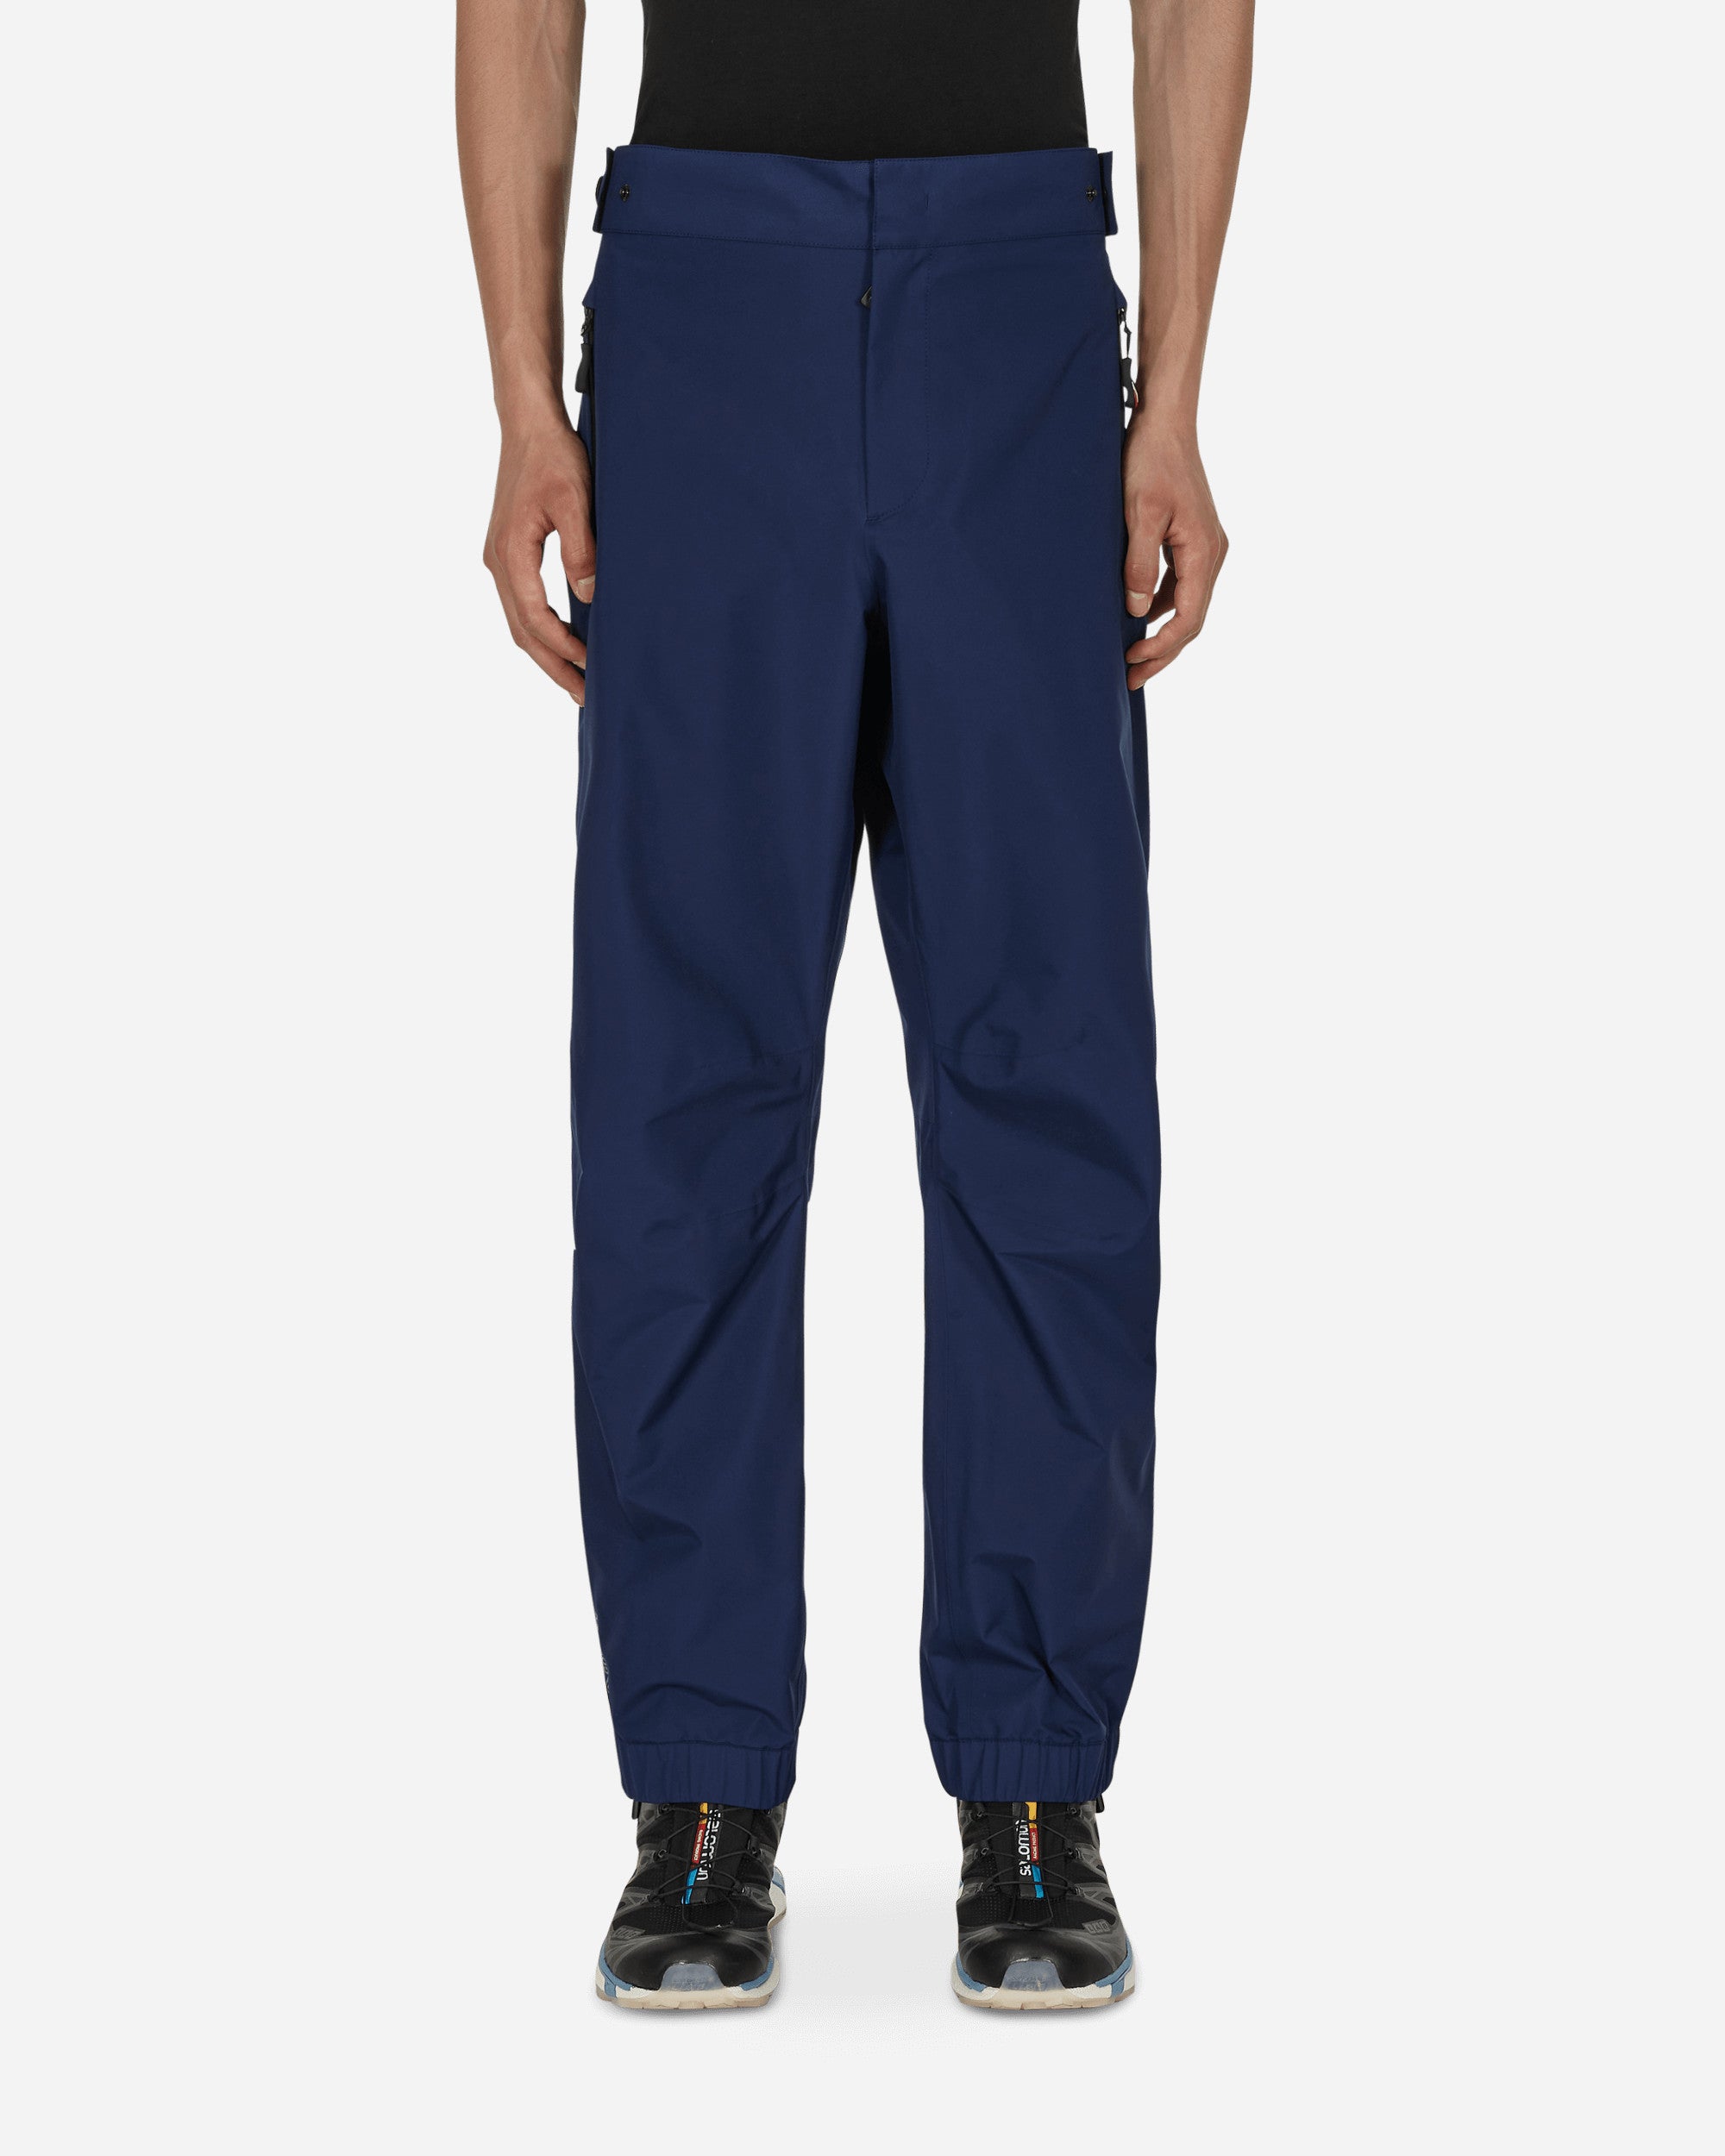 Moncler Grenoble Trousers Dark Blue Pants Trousers H20972A00013 76F